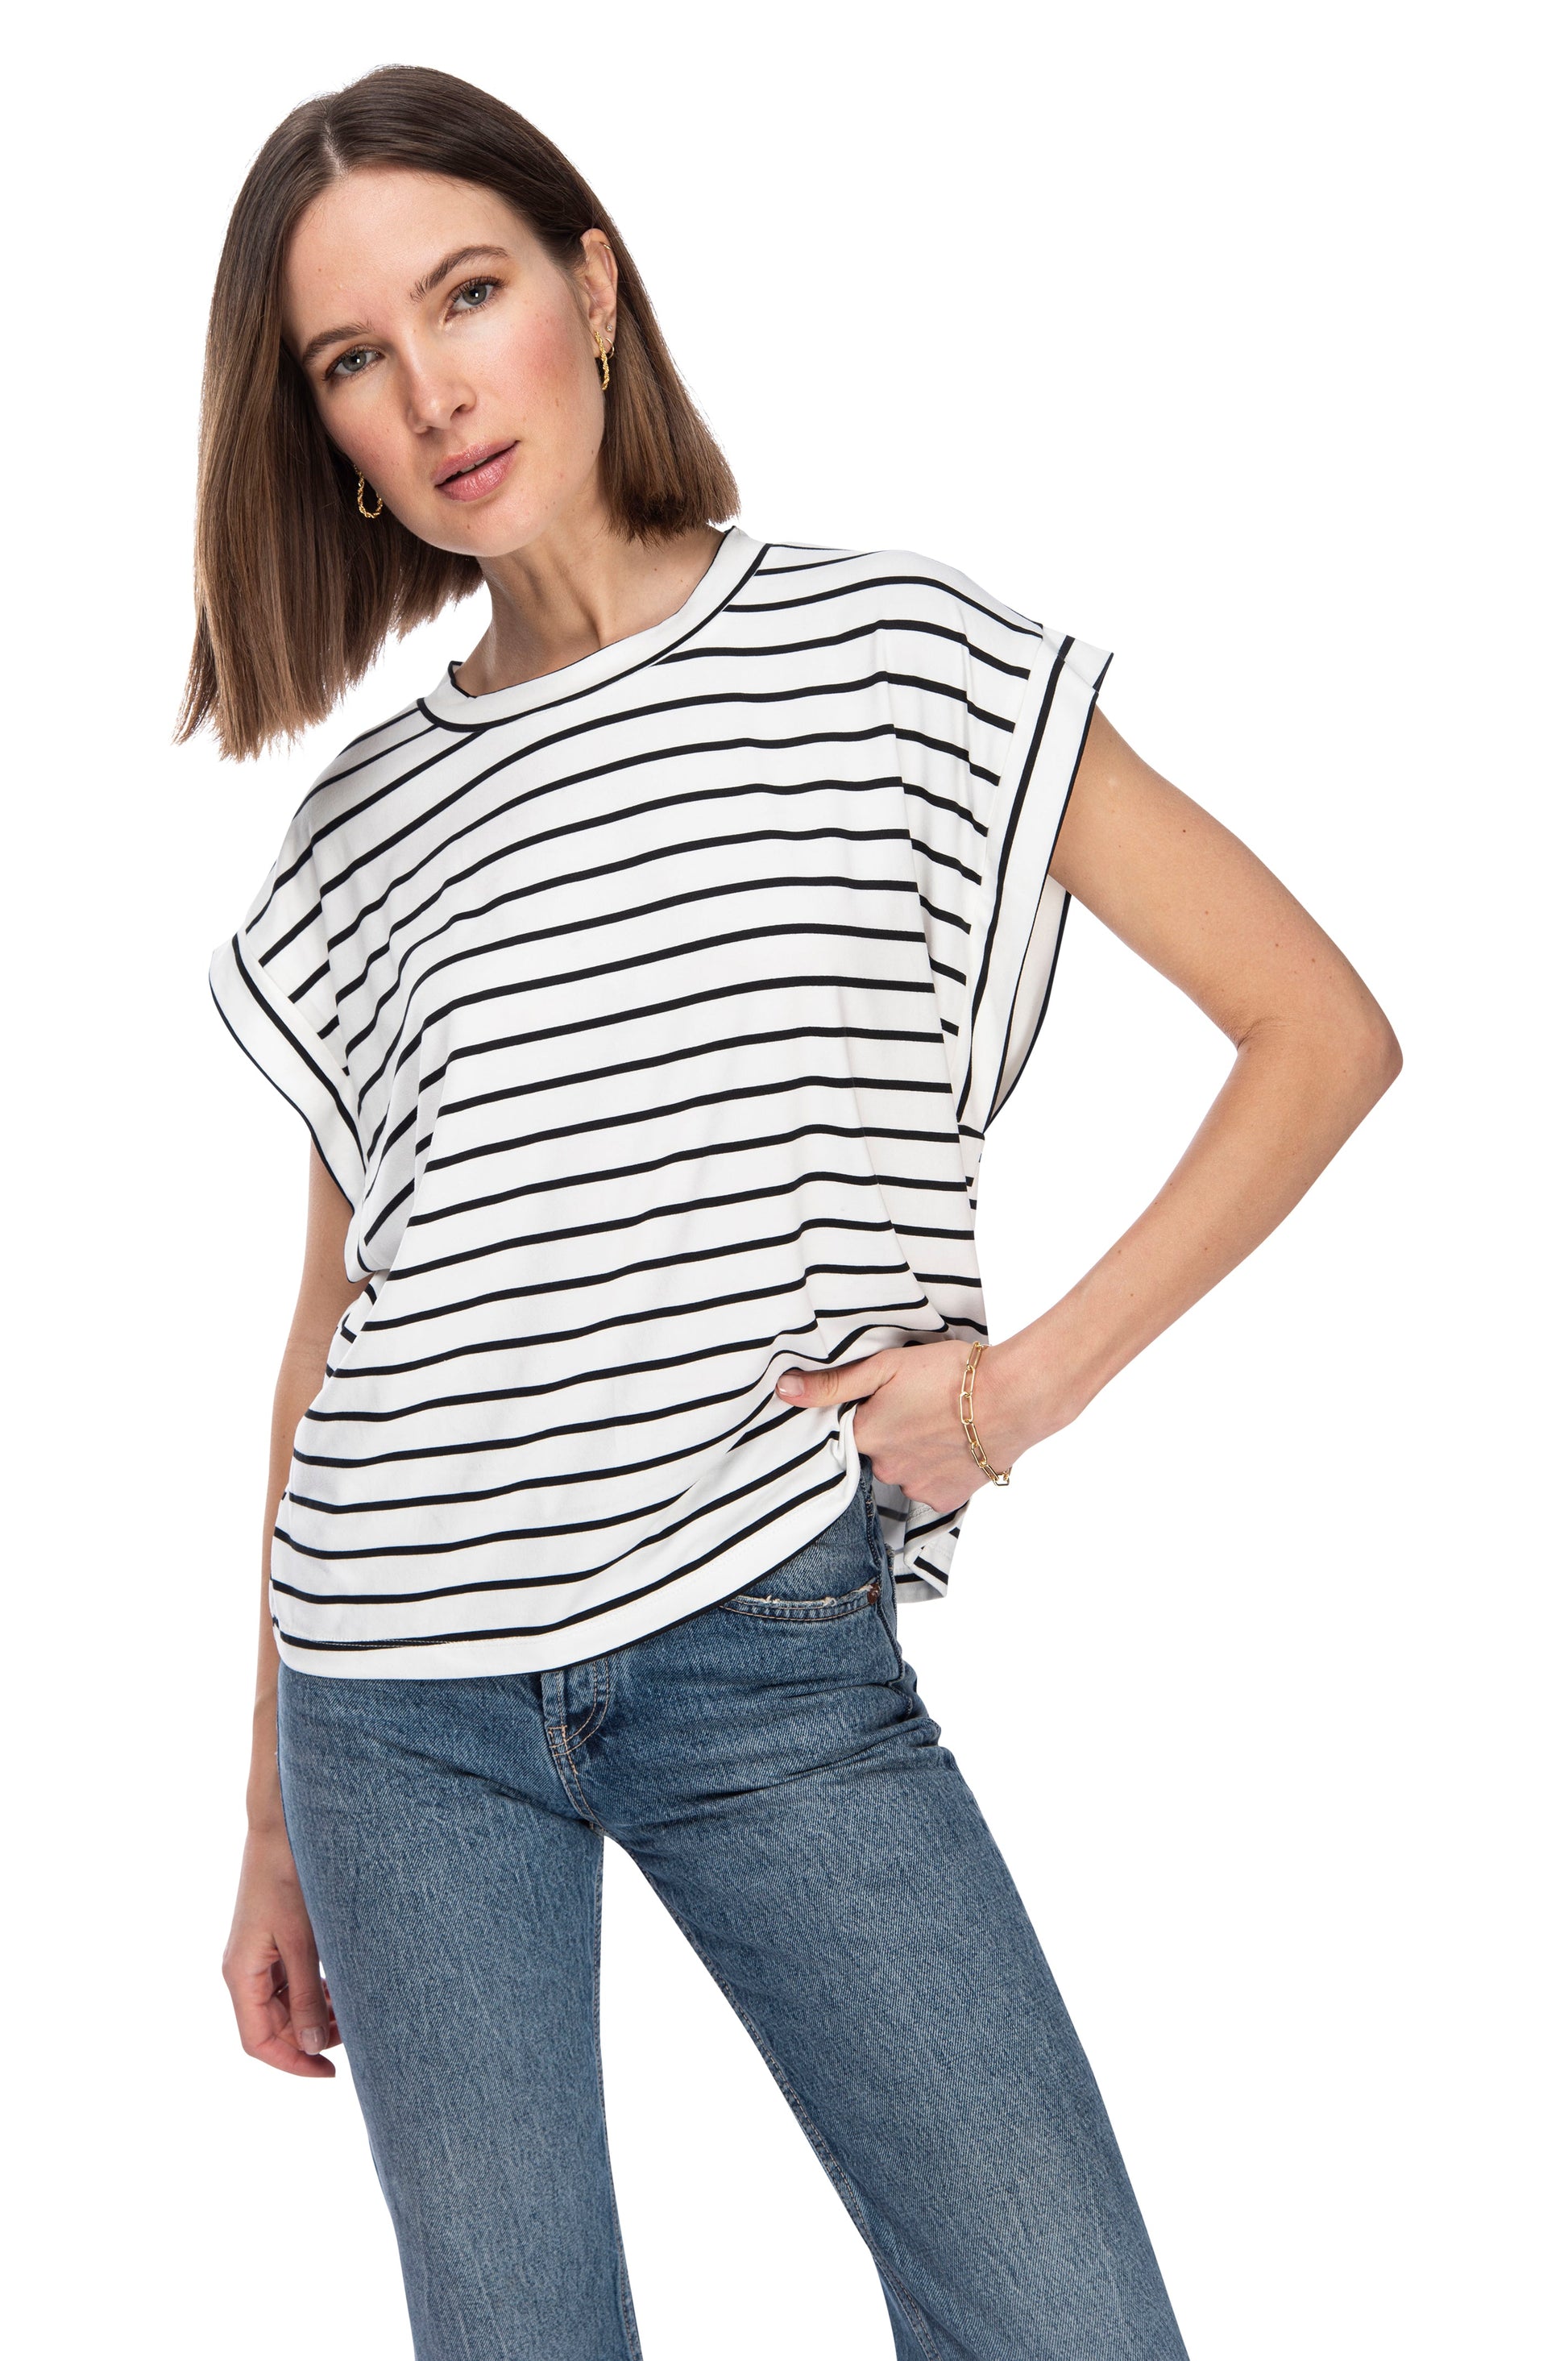 A woman in a casual DROP ARMHOLE TEE by B Collection by Bobeau and jeans posing confidently with one hand on her hip.